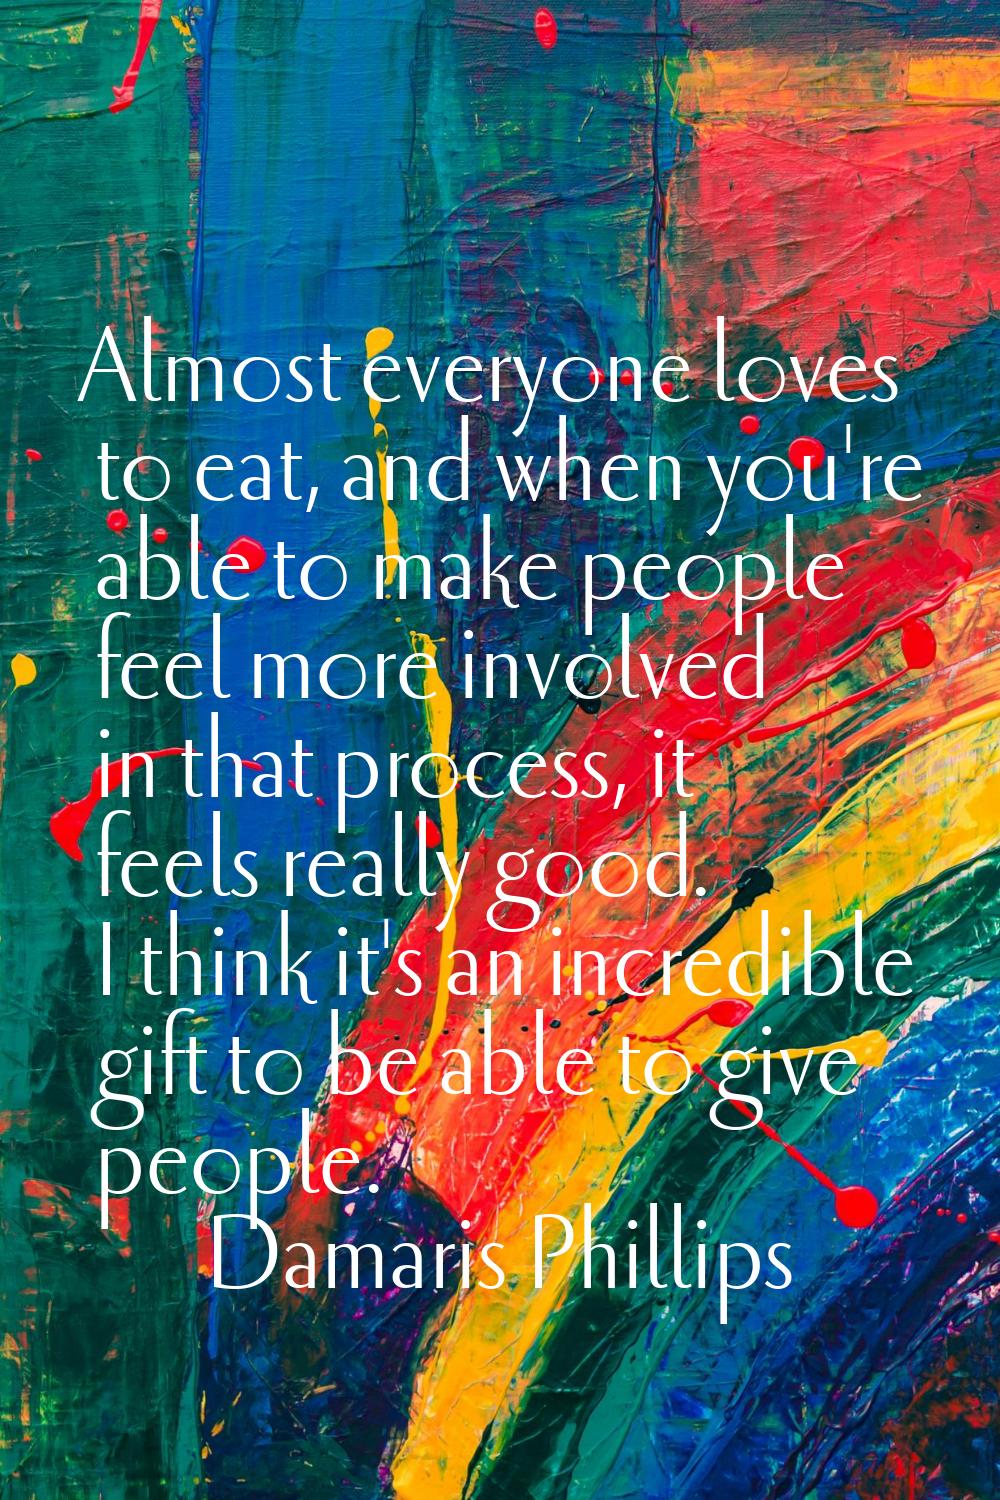 Almost everyone loves to eat, and when you're able to make people feel more involved in that proces